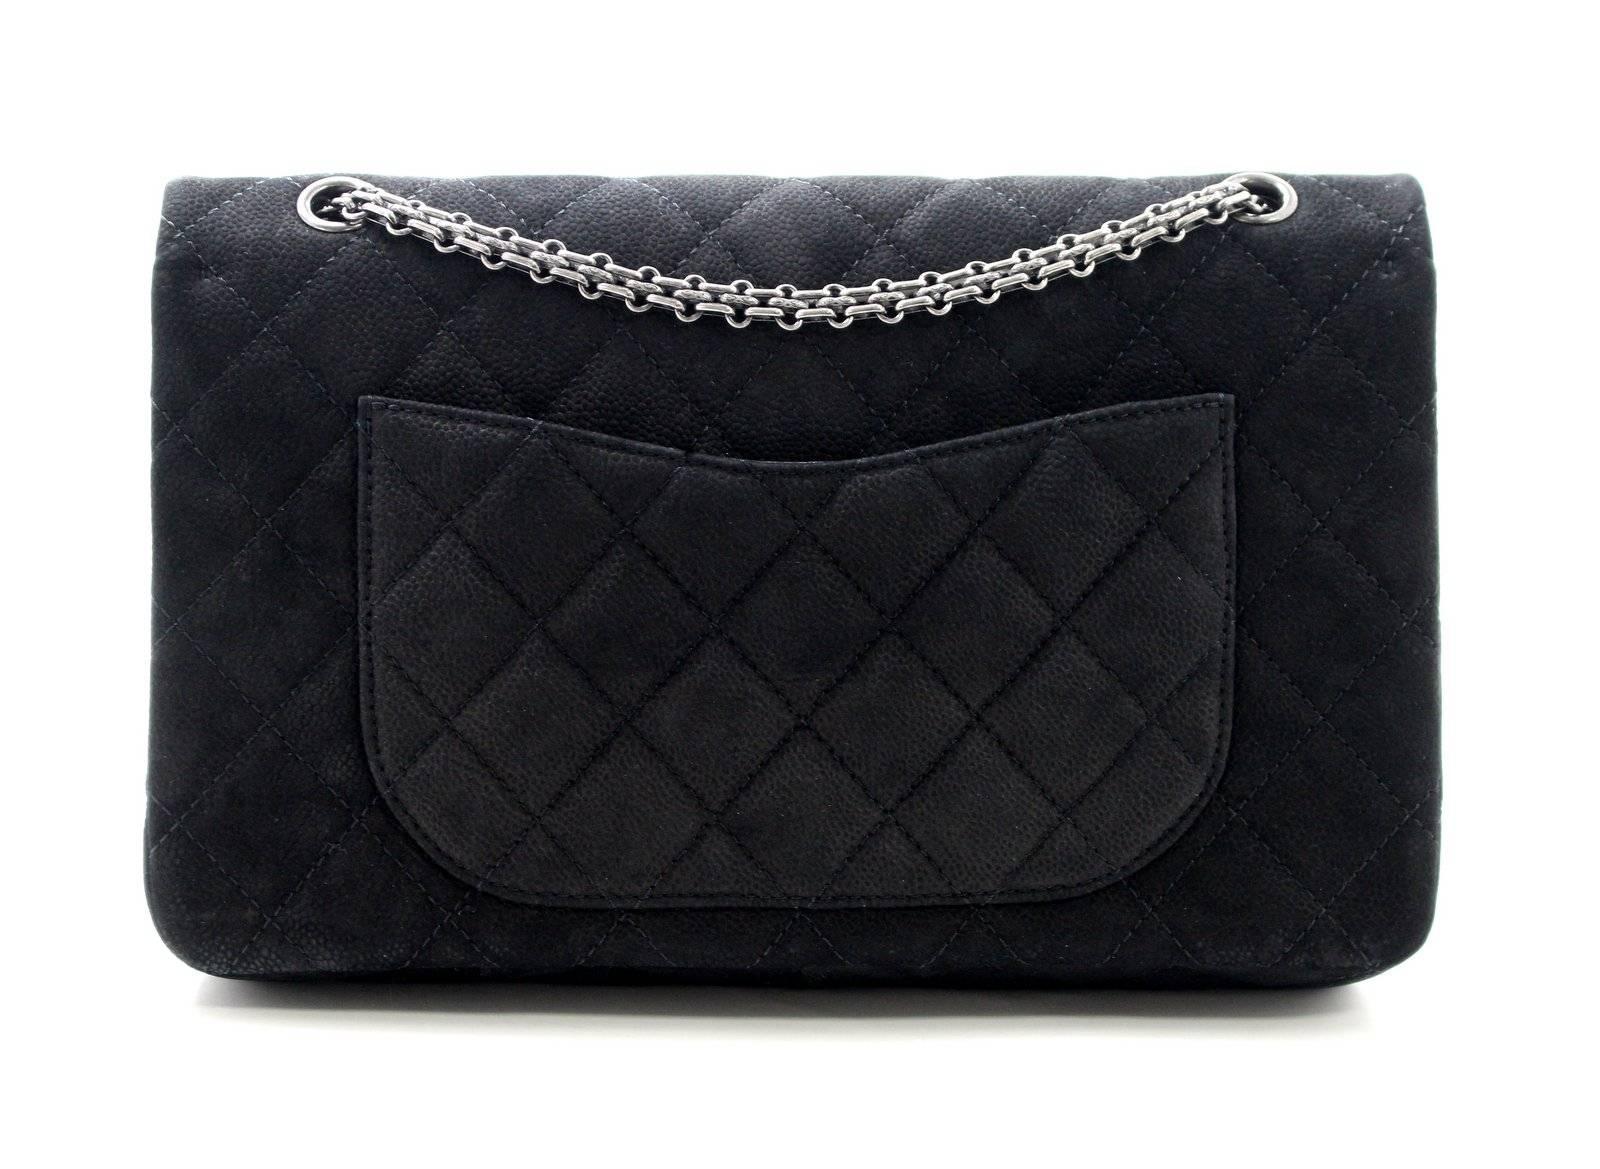 Chanel Black Nubuck Leather 2.55 Large Shoulder Bag- Retail price $6,000.00; NEVER CARRIED!!!
Breathtaking Chanel Flap Bag is largest size, 2.55.  Black Nubuck leather with Ruthenium hardware.

Black Nubuck leather has a texture like caviar and